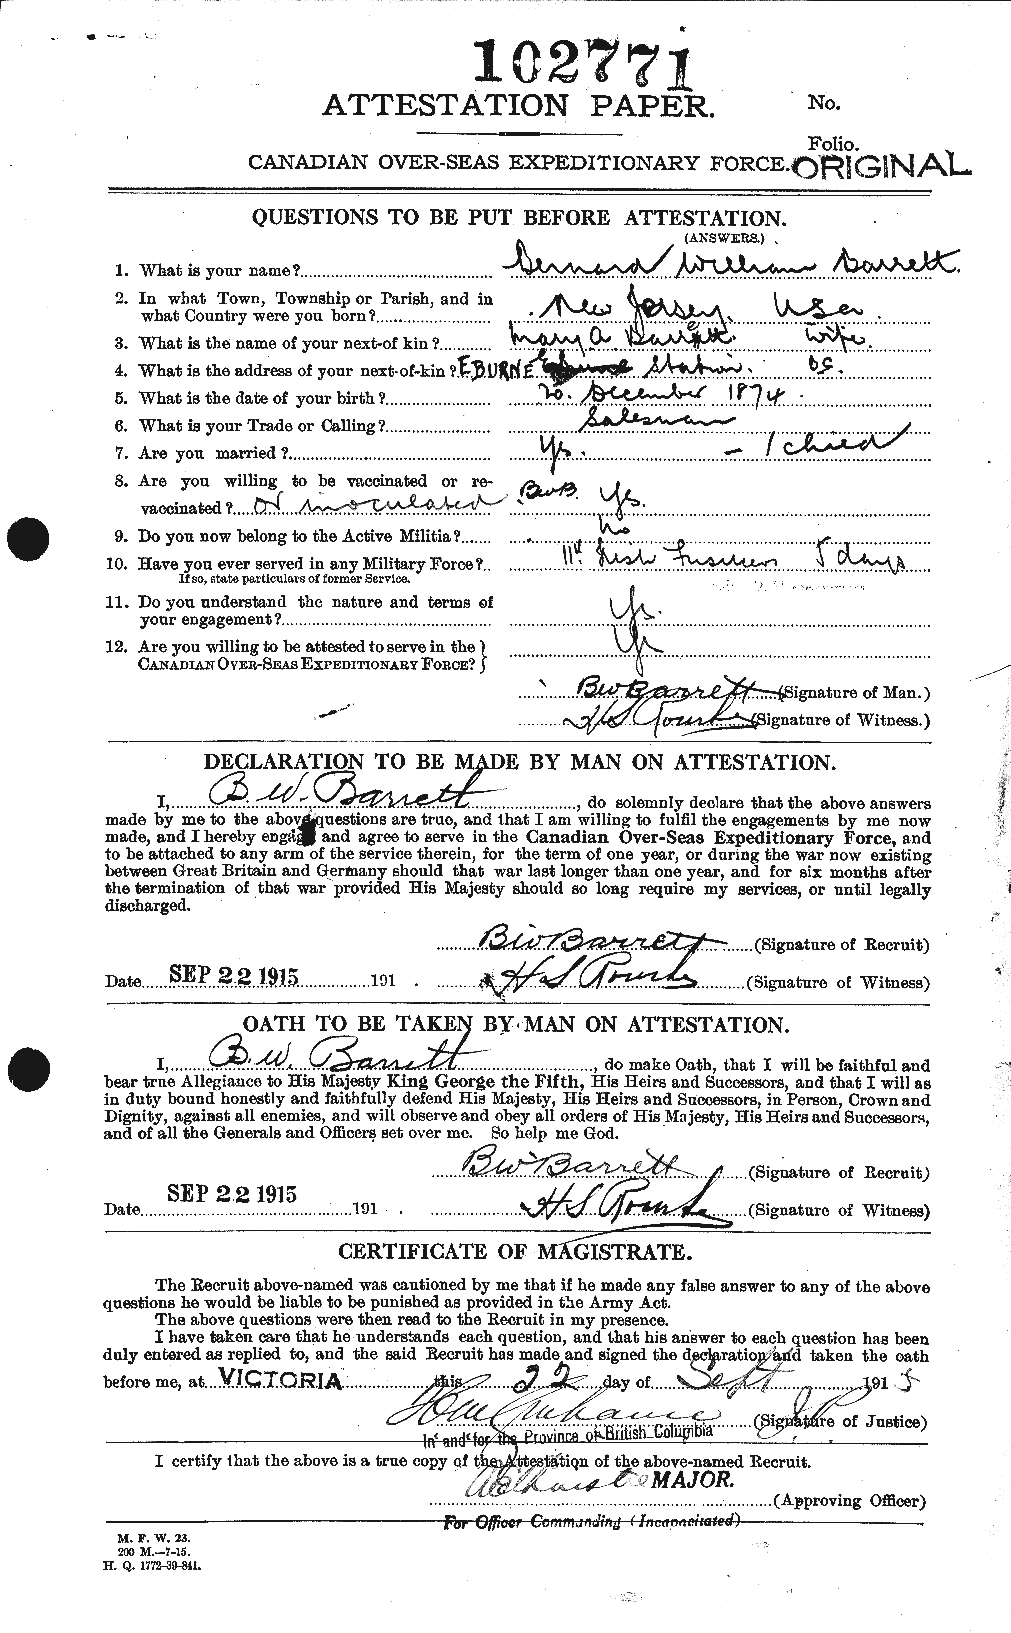 Personnel Records of the First World War - CEF 222237a